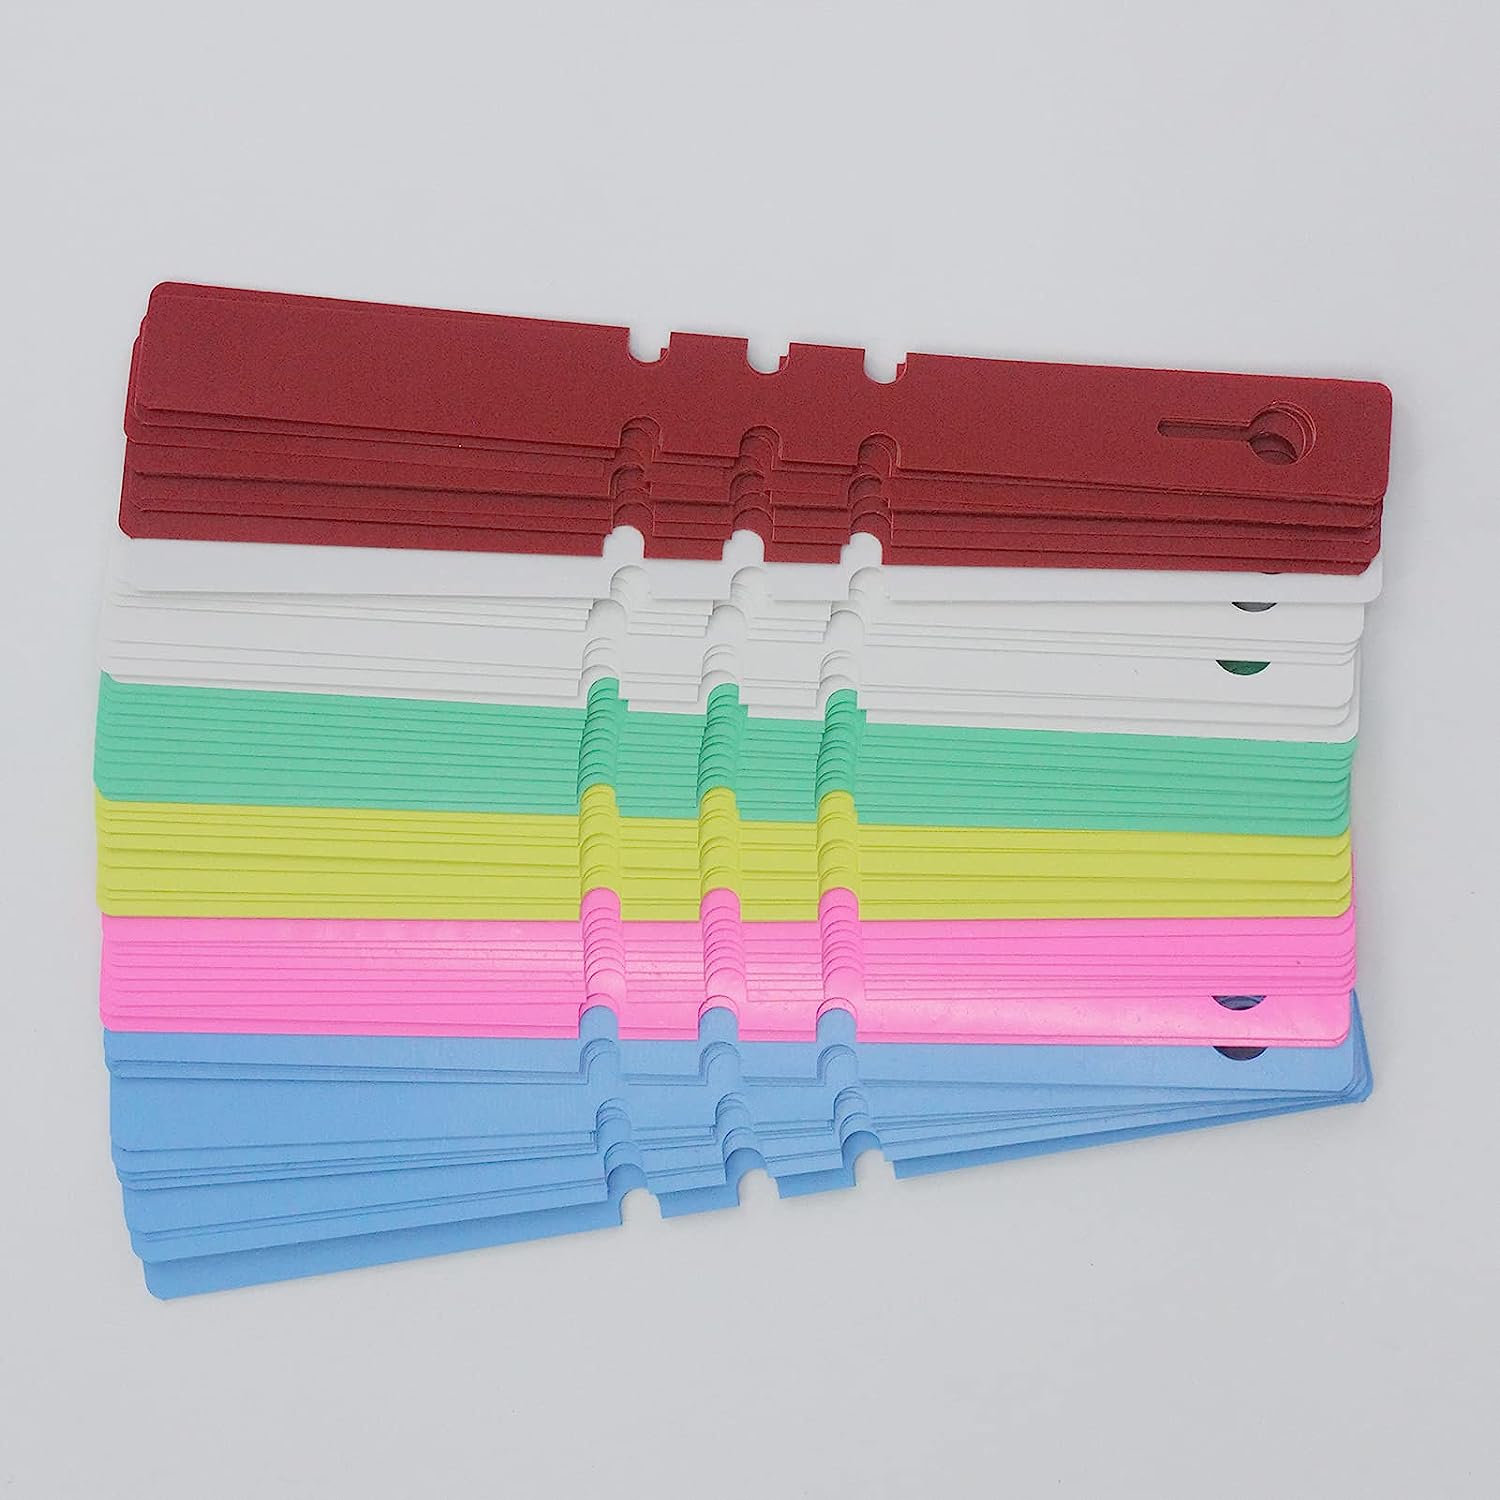 200 PCS Plastic Tags Water Proof Shipping Tags 2.4 x 3.94 Plastic Tags  for Labeling Label Tags Shipping Labels for Logistics Use Luggage Labeling